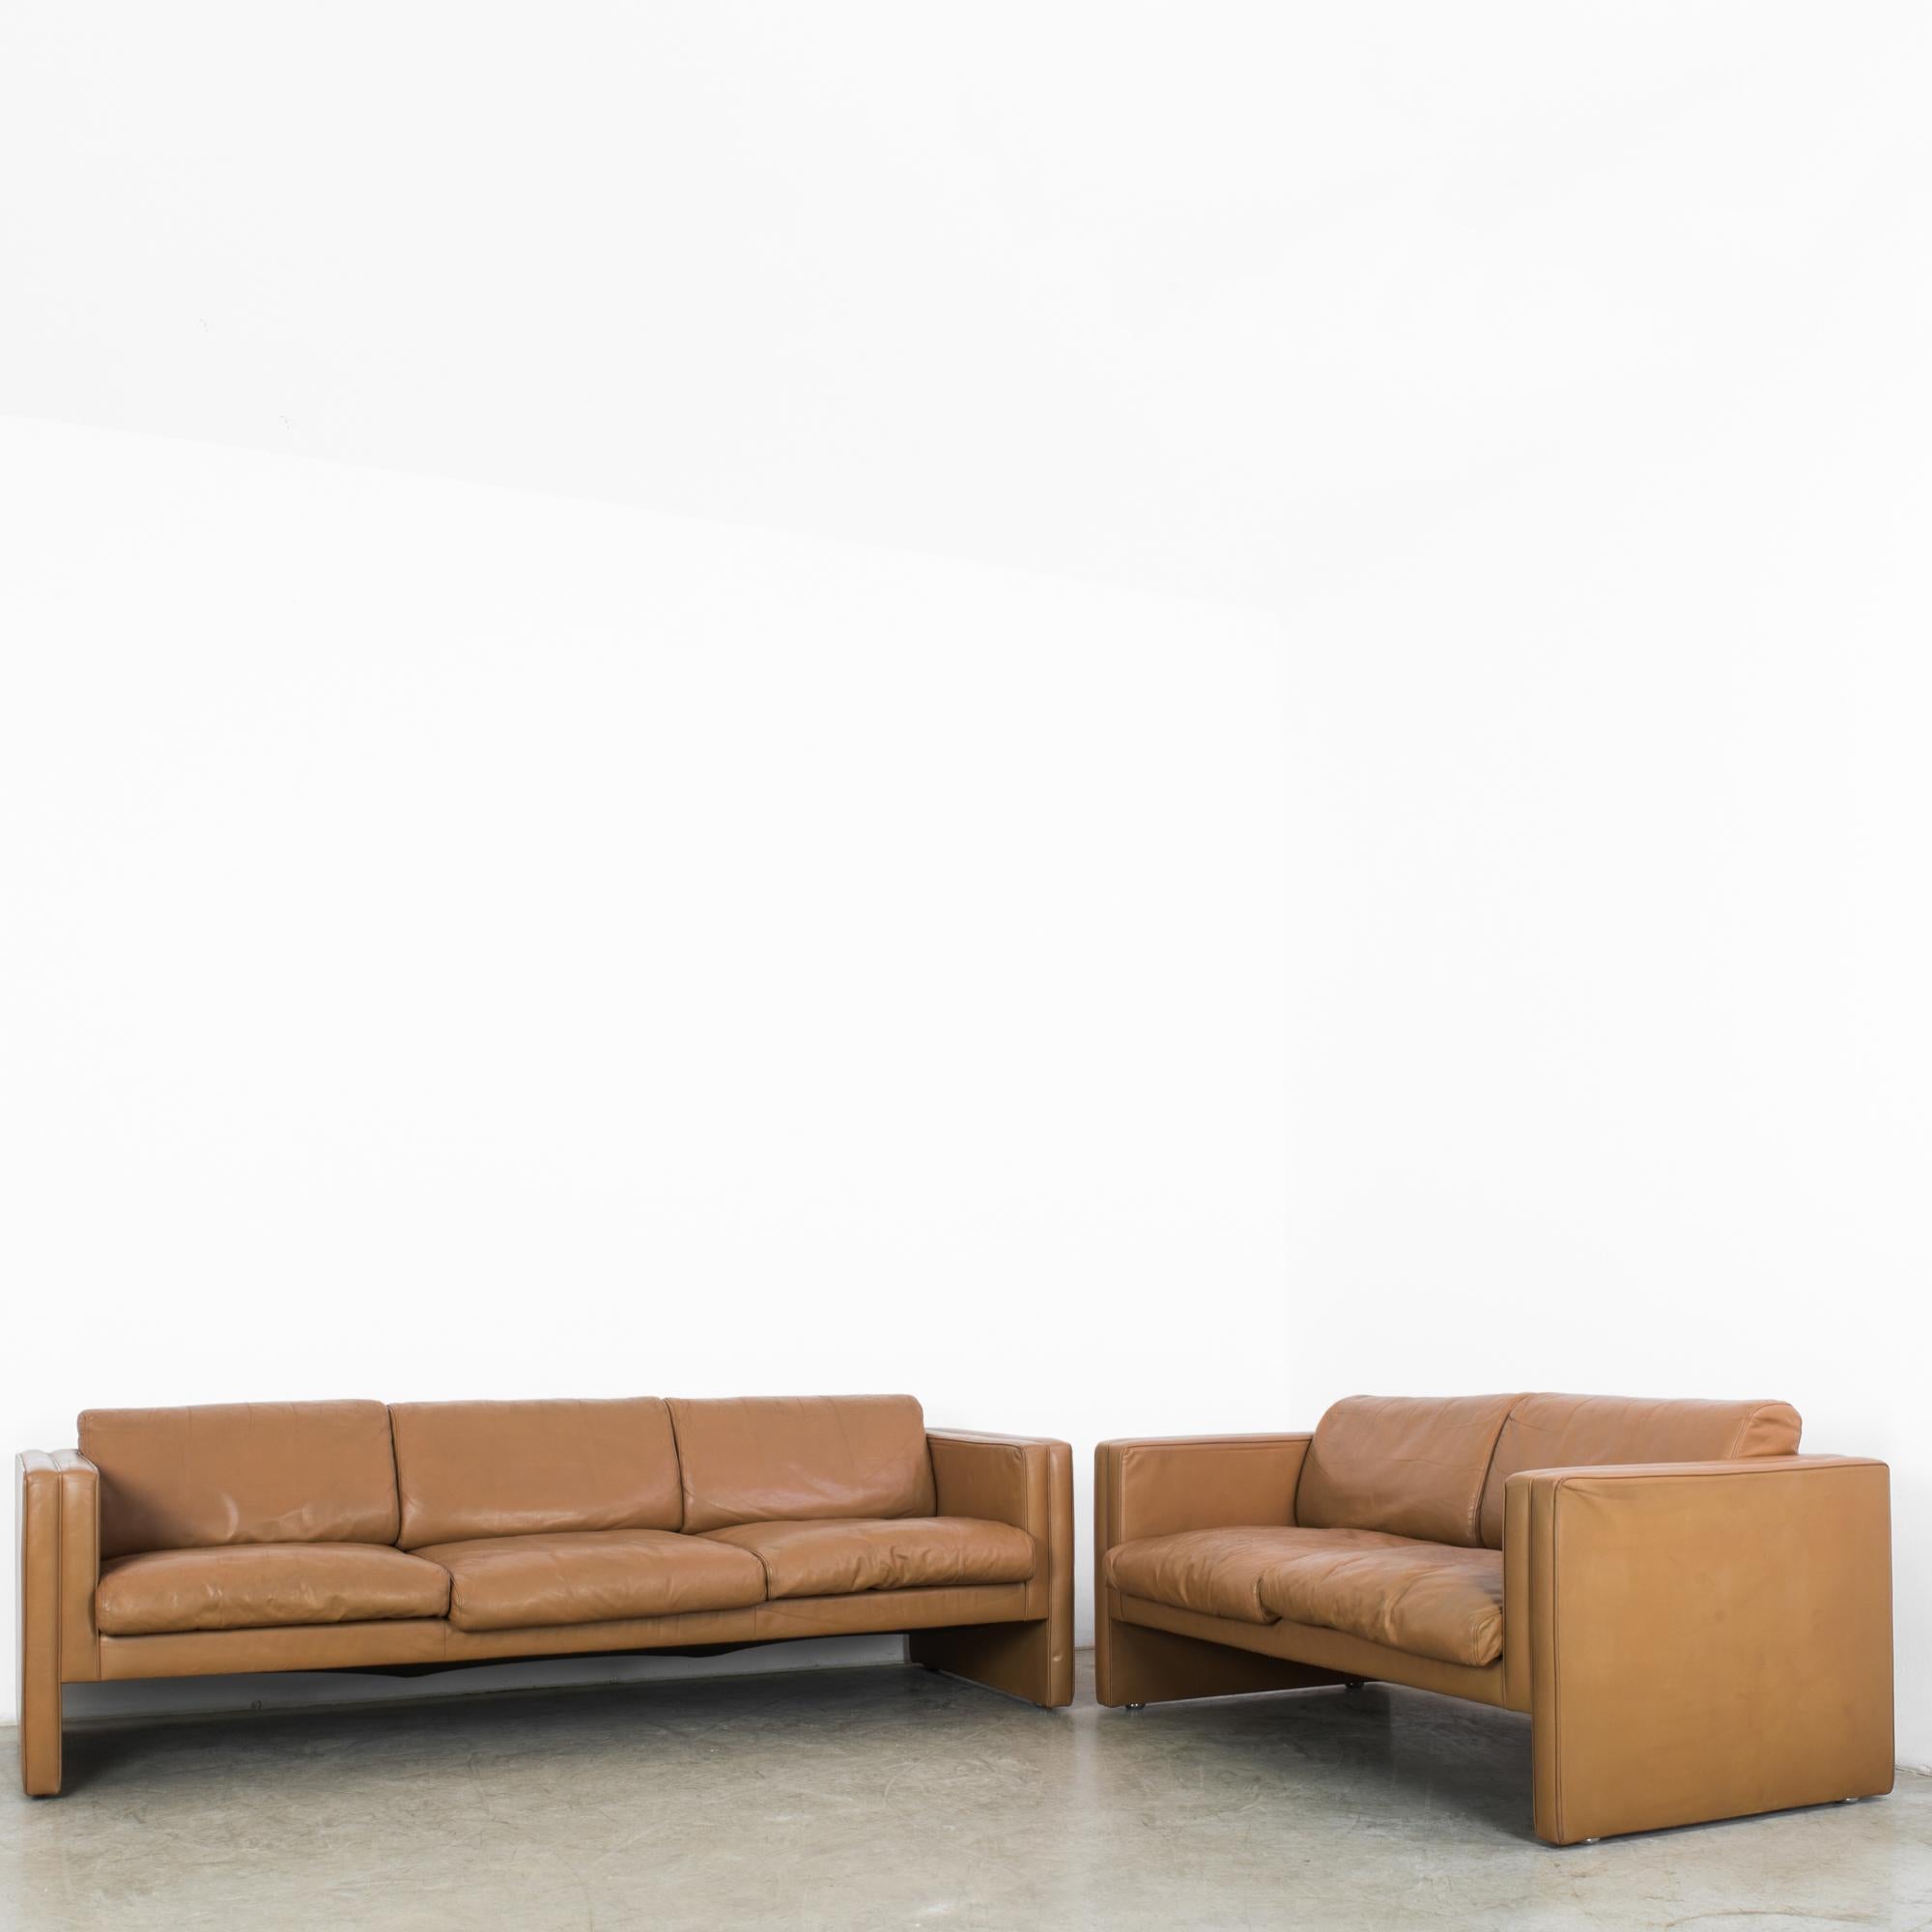 A pair of 1960s leather sofas by Danish furniture designers Knoll. A Mid-Century Modernist silhouette in camel-colored leather. The light frame is composed of clean, straight lines; the cushions are ample and deep. Included are one three seat sofa,